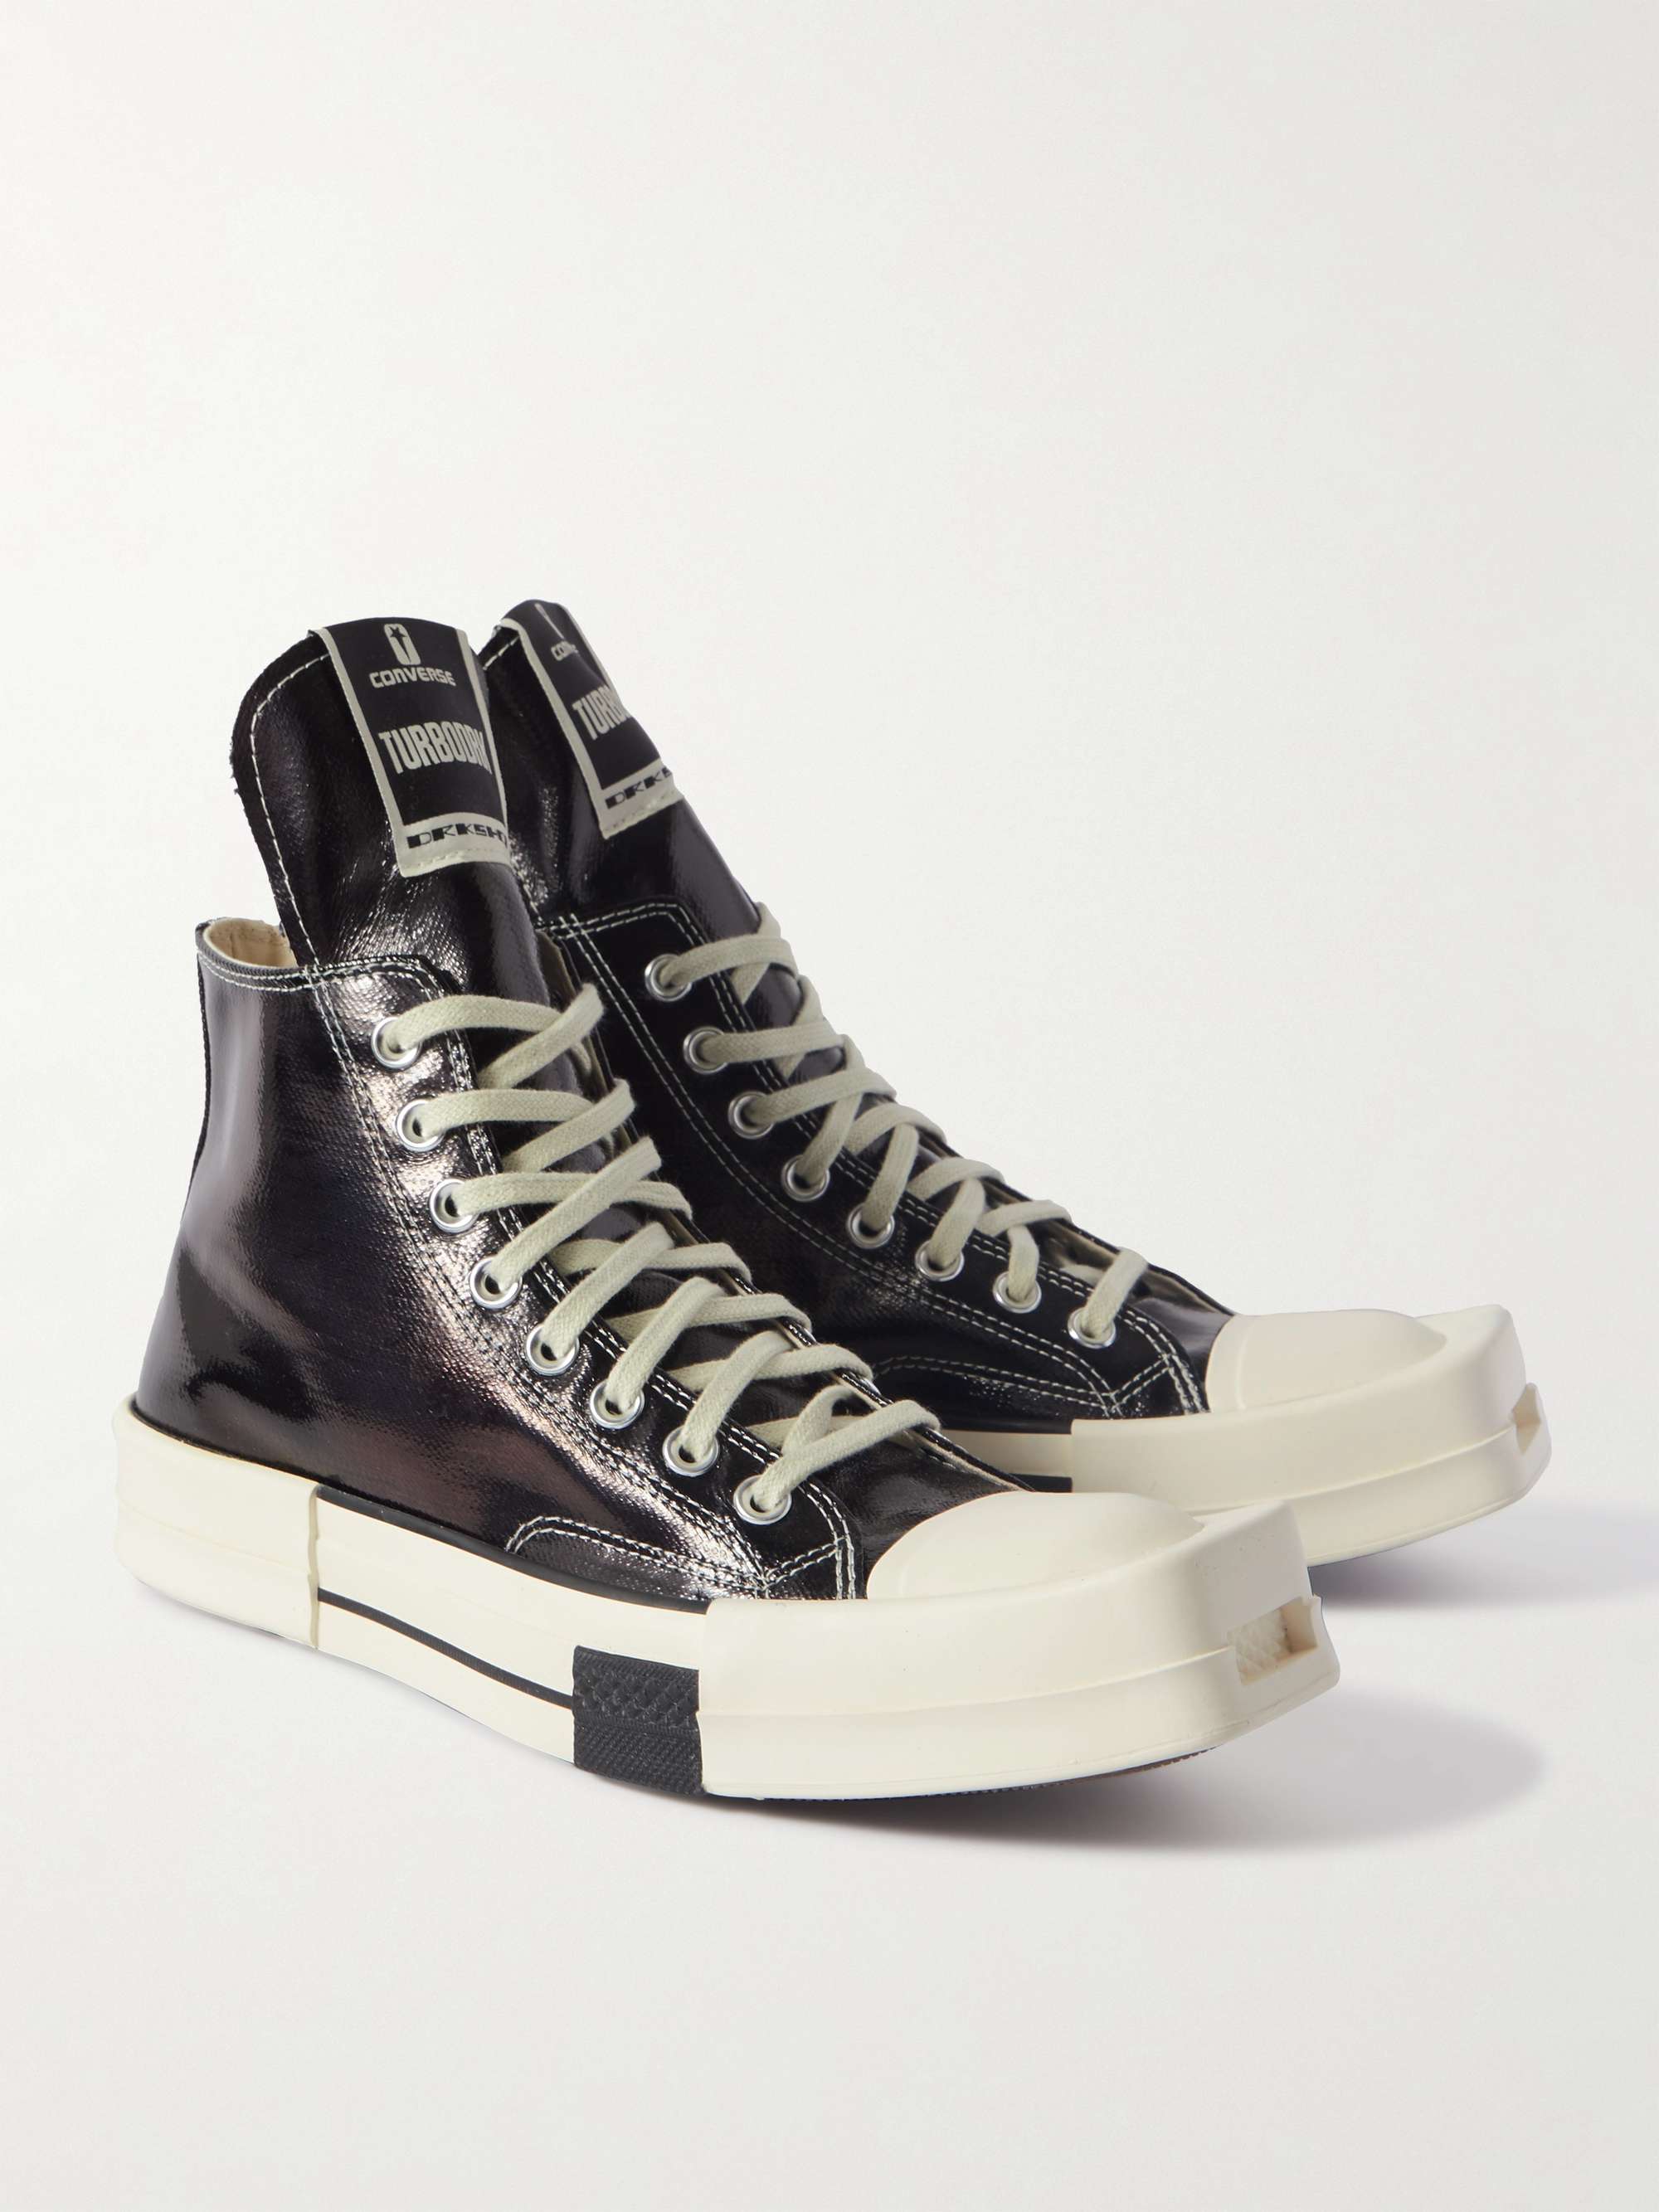 RICK OWENS + Converse TURBODRK Chuck 70 Coated-Canvas High-Top Sneakers